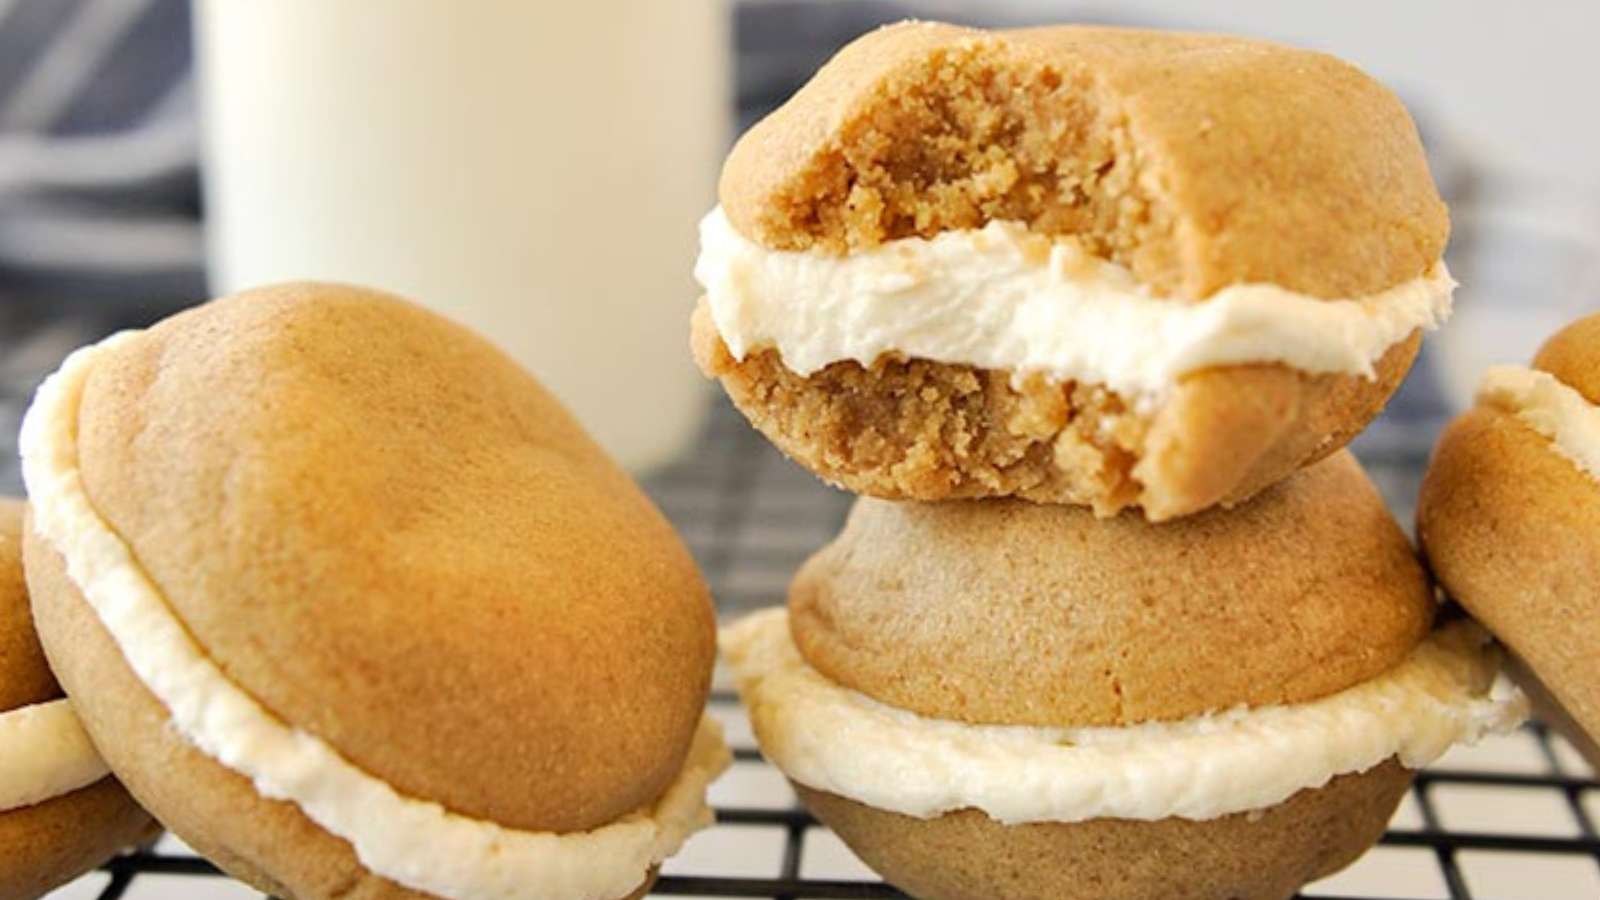 Fluffernutter Cookie Sandwiches recipe by Home Cooked Harvest.